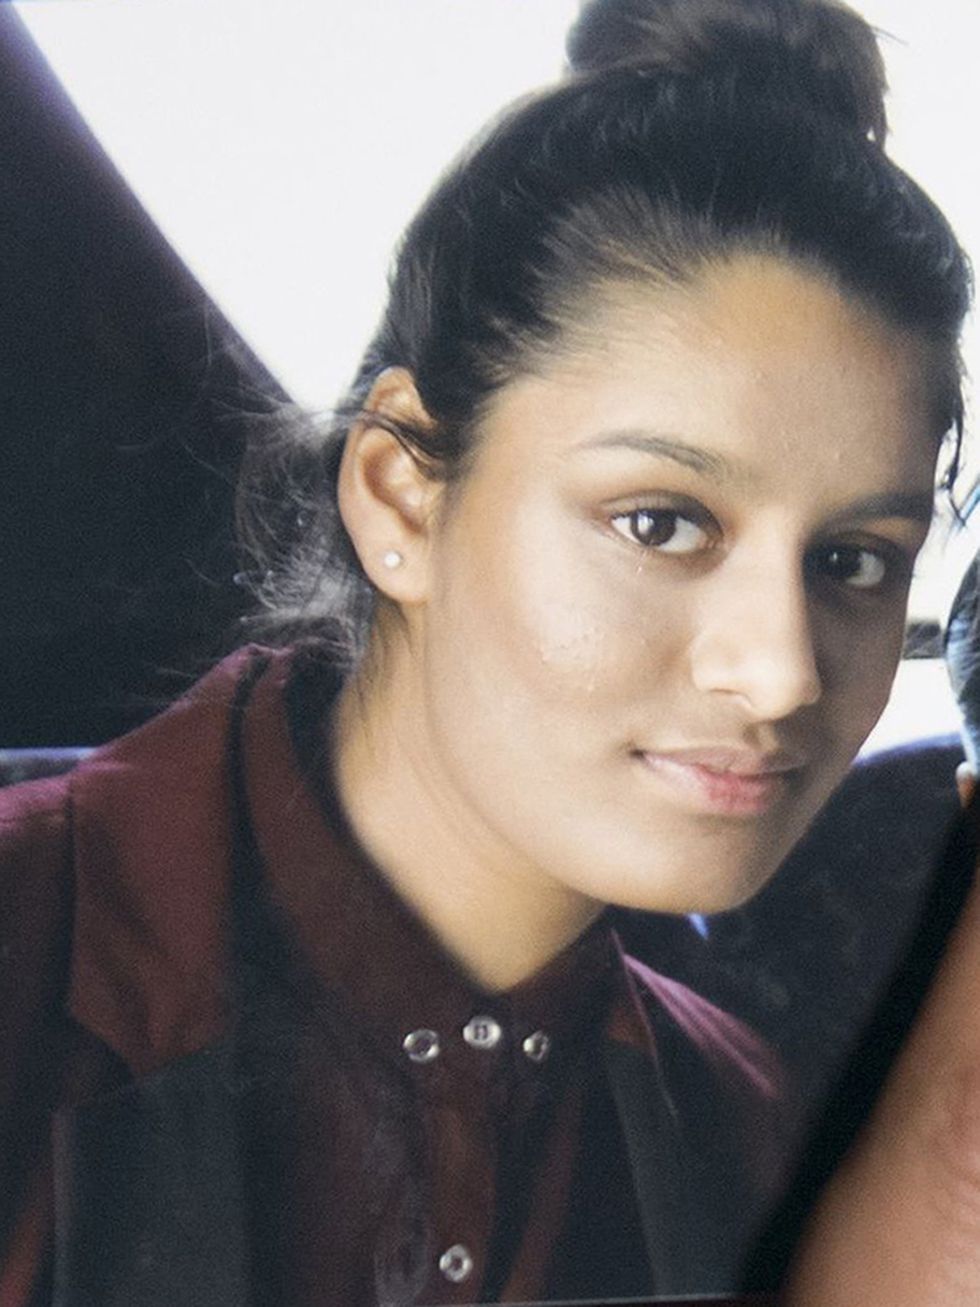 Shamima Begum fled to Syria as a 15-year-old